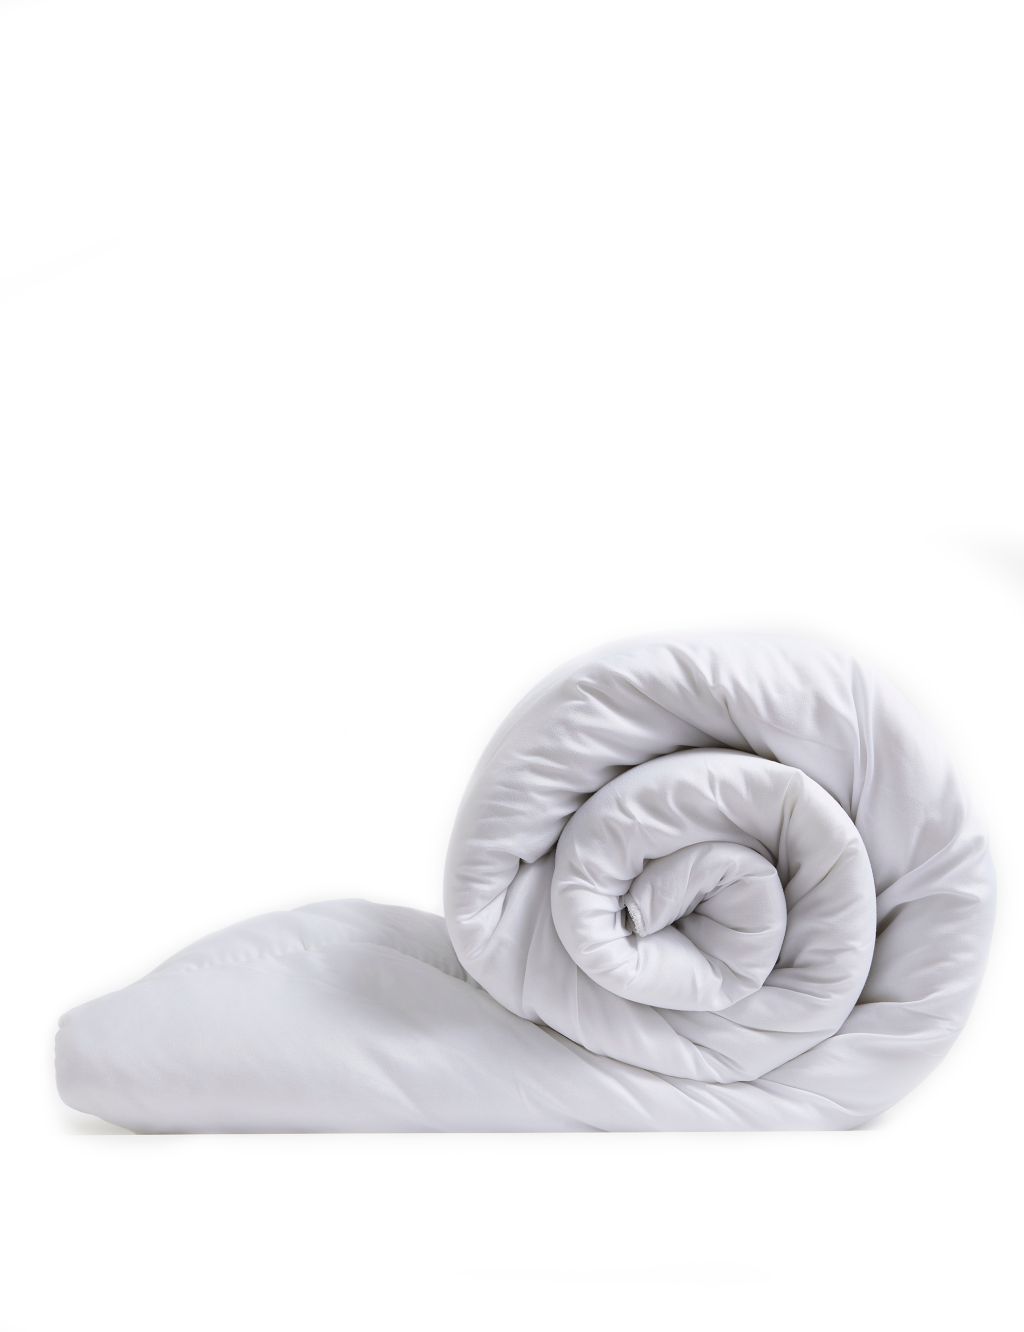 Simply Protect 10.5 Tog Duvet image 4